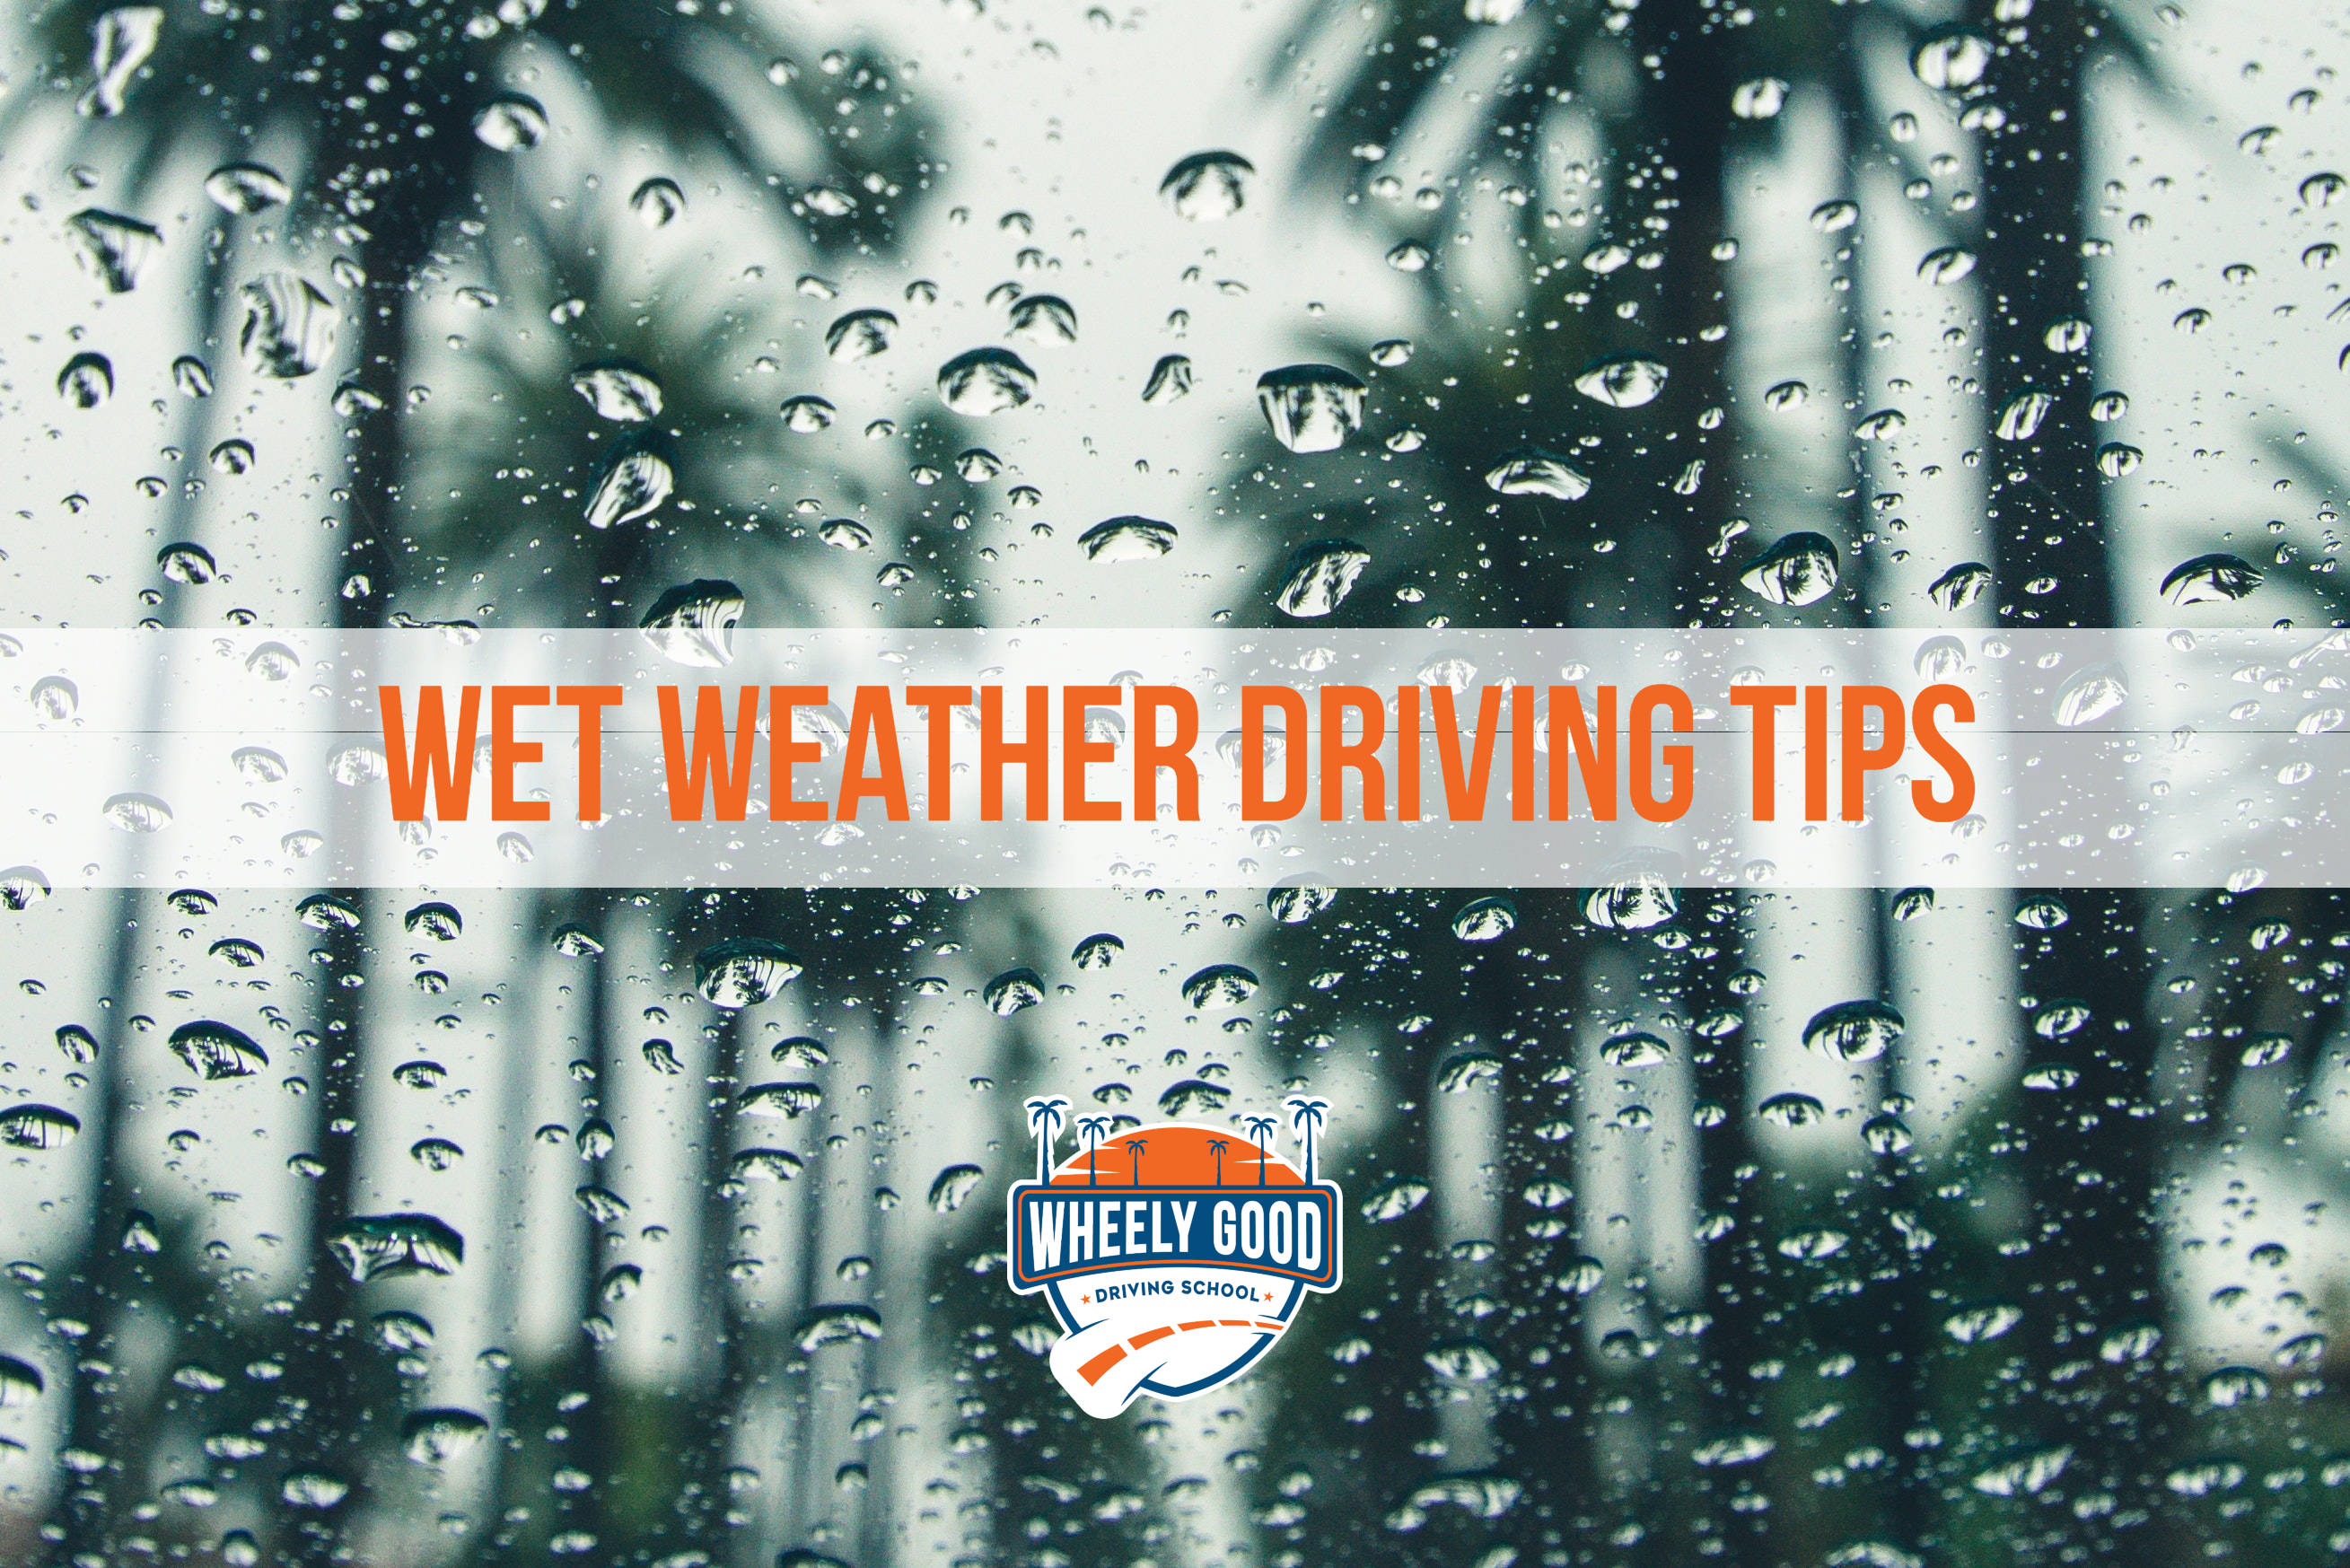 Tips for new drivers traveling on wet roads.